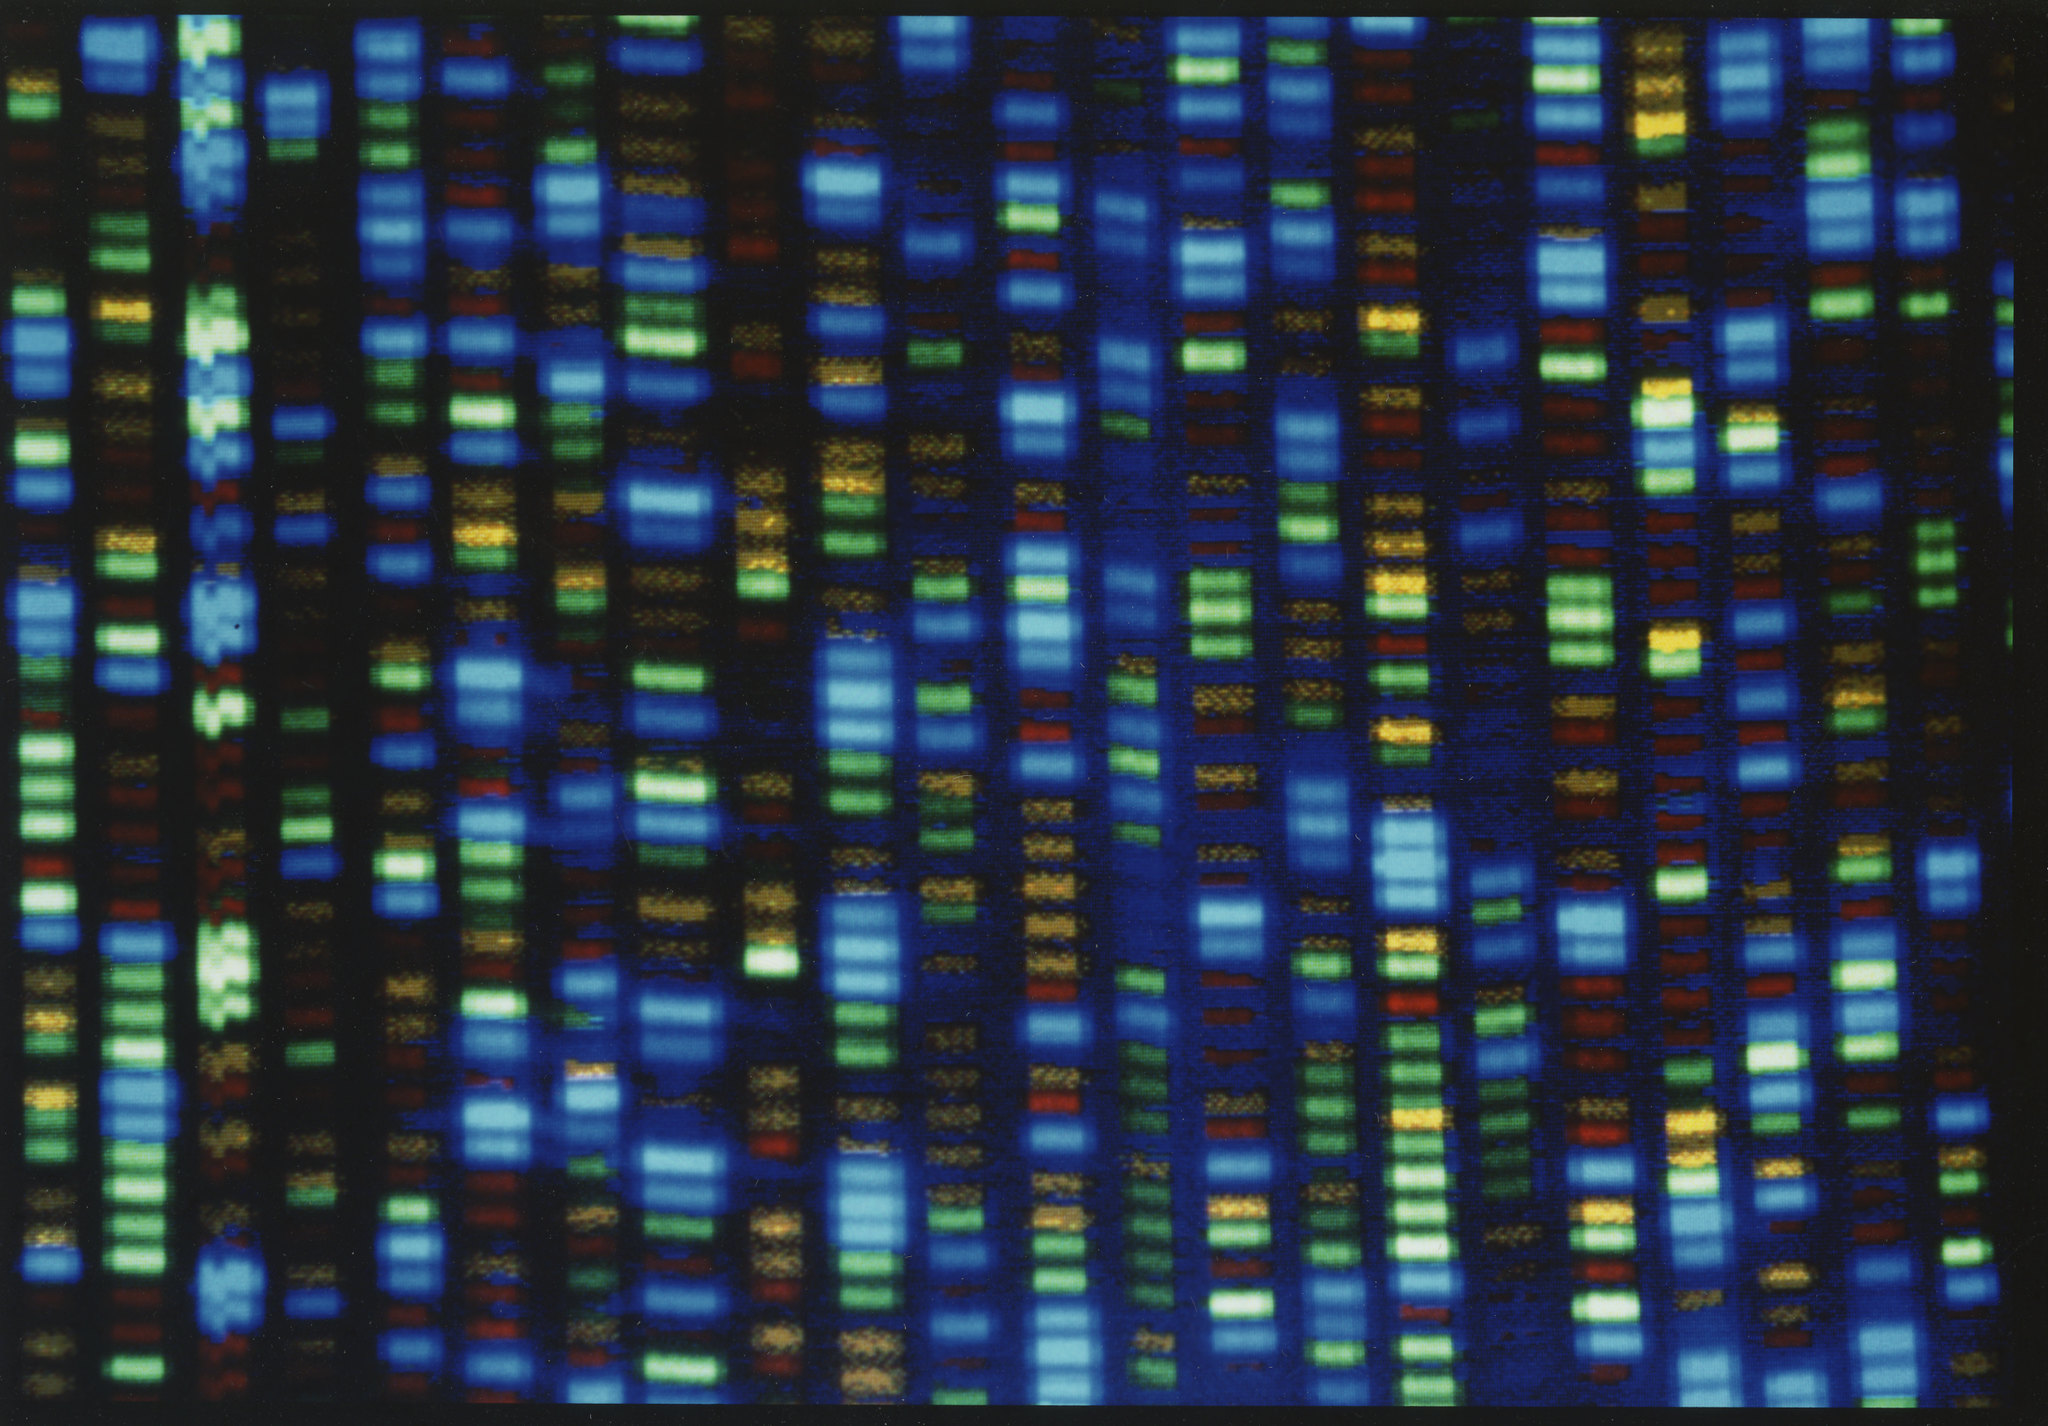 Output from DNA sequencer (National Human Genome Research Institute)